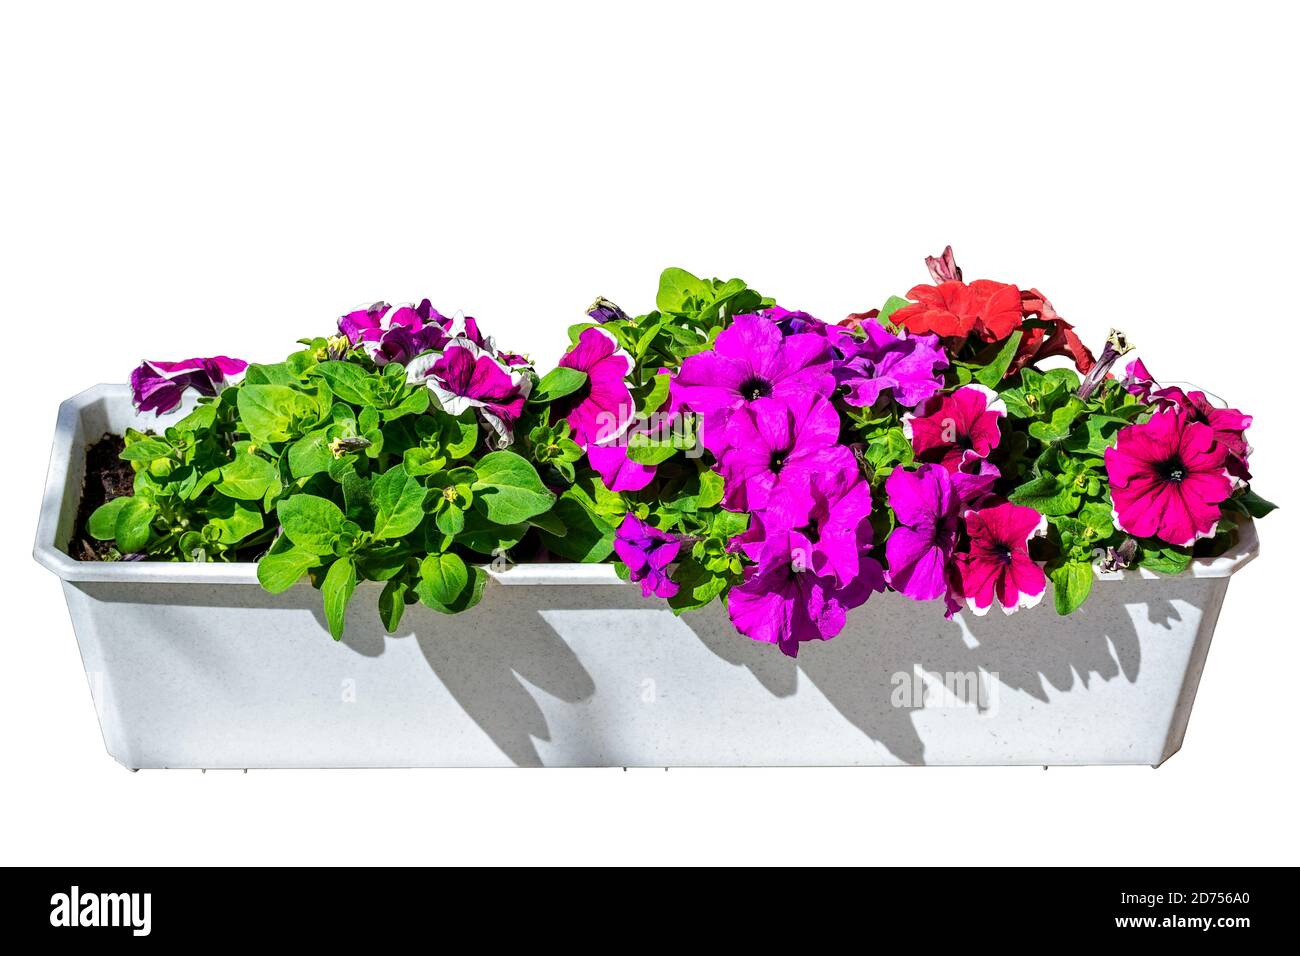 Petunia flowers of bright lilac color with green leaves in a white box isolated on a white background. Stock Photo